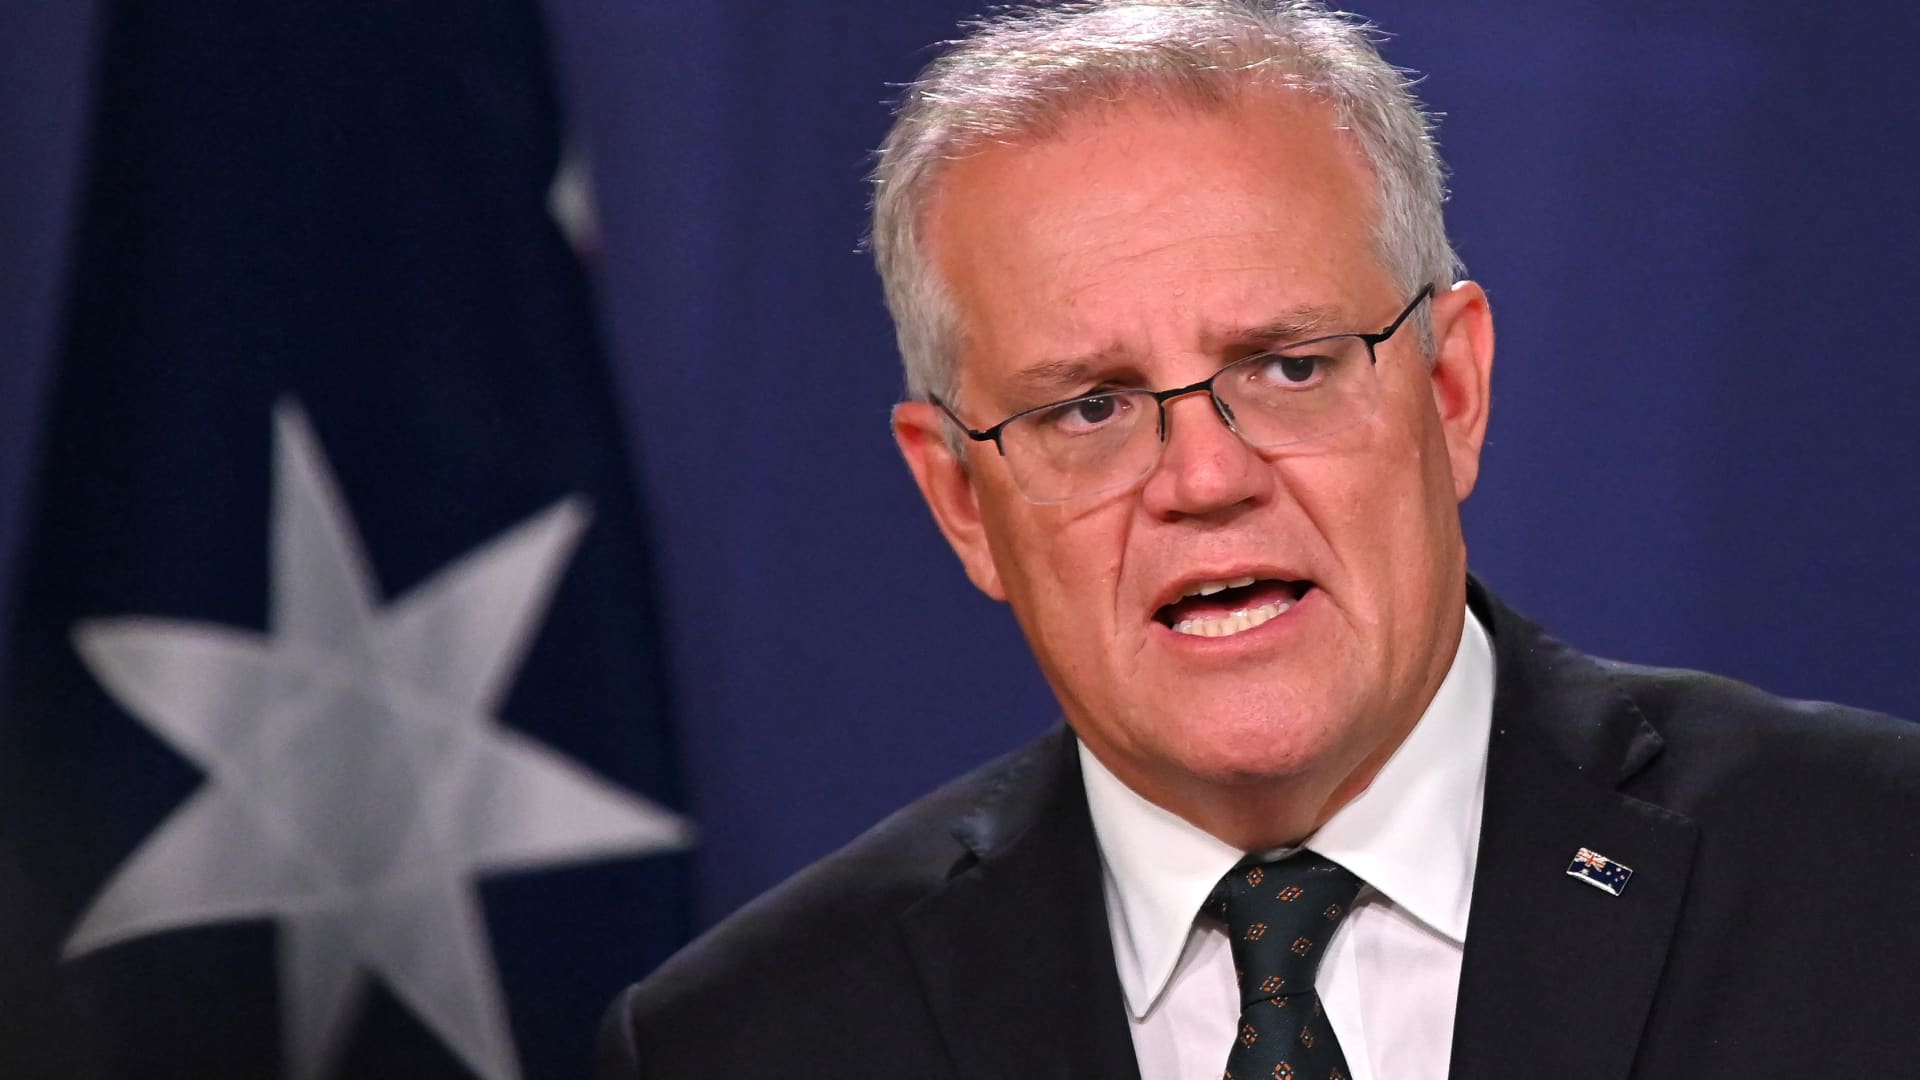 Australia's Prime Minister Scott Morrison speaks to the media to announce sanctions on top Russian officials following the invasion of eastern Ukraine, during a press conference in Sydney on February 23, 2022.